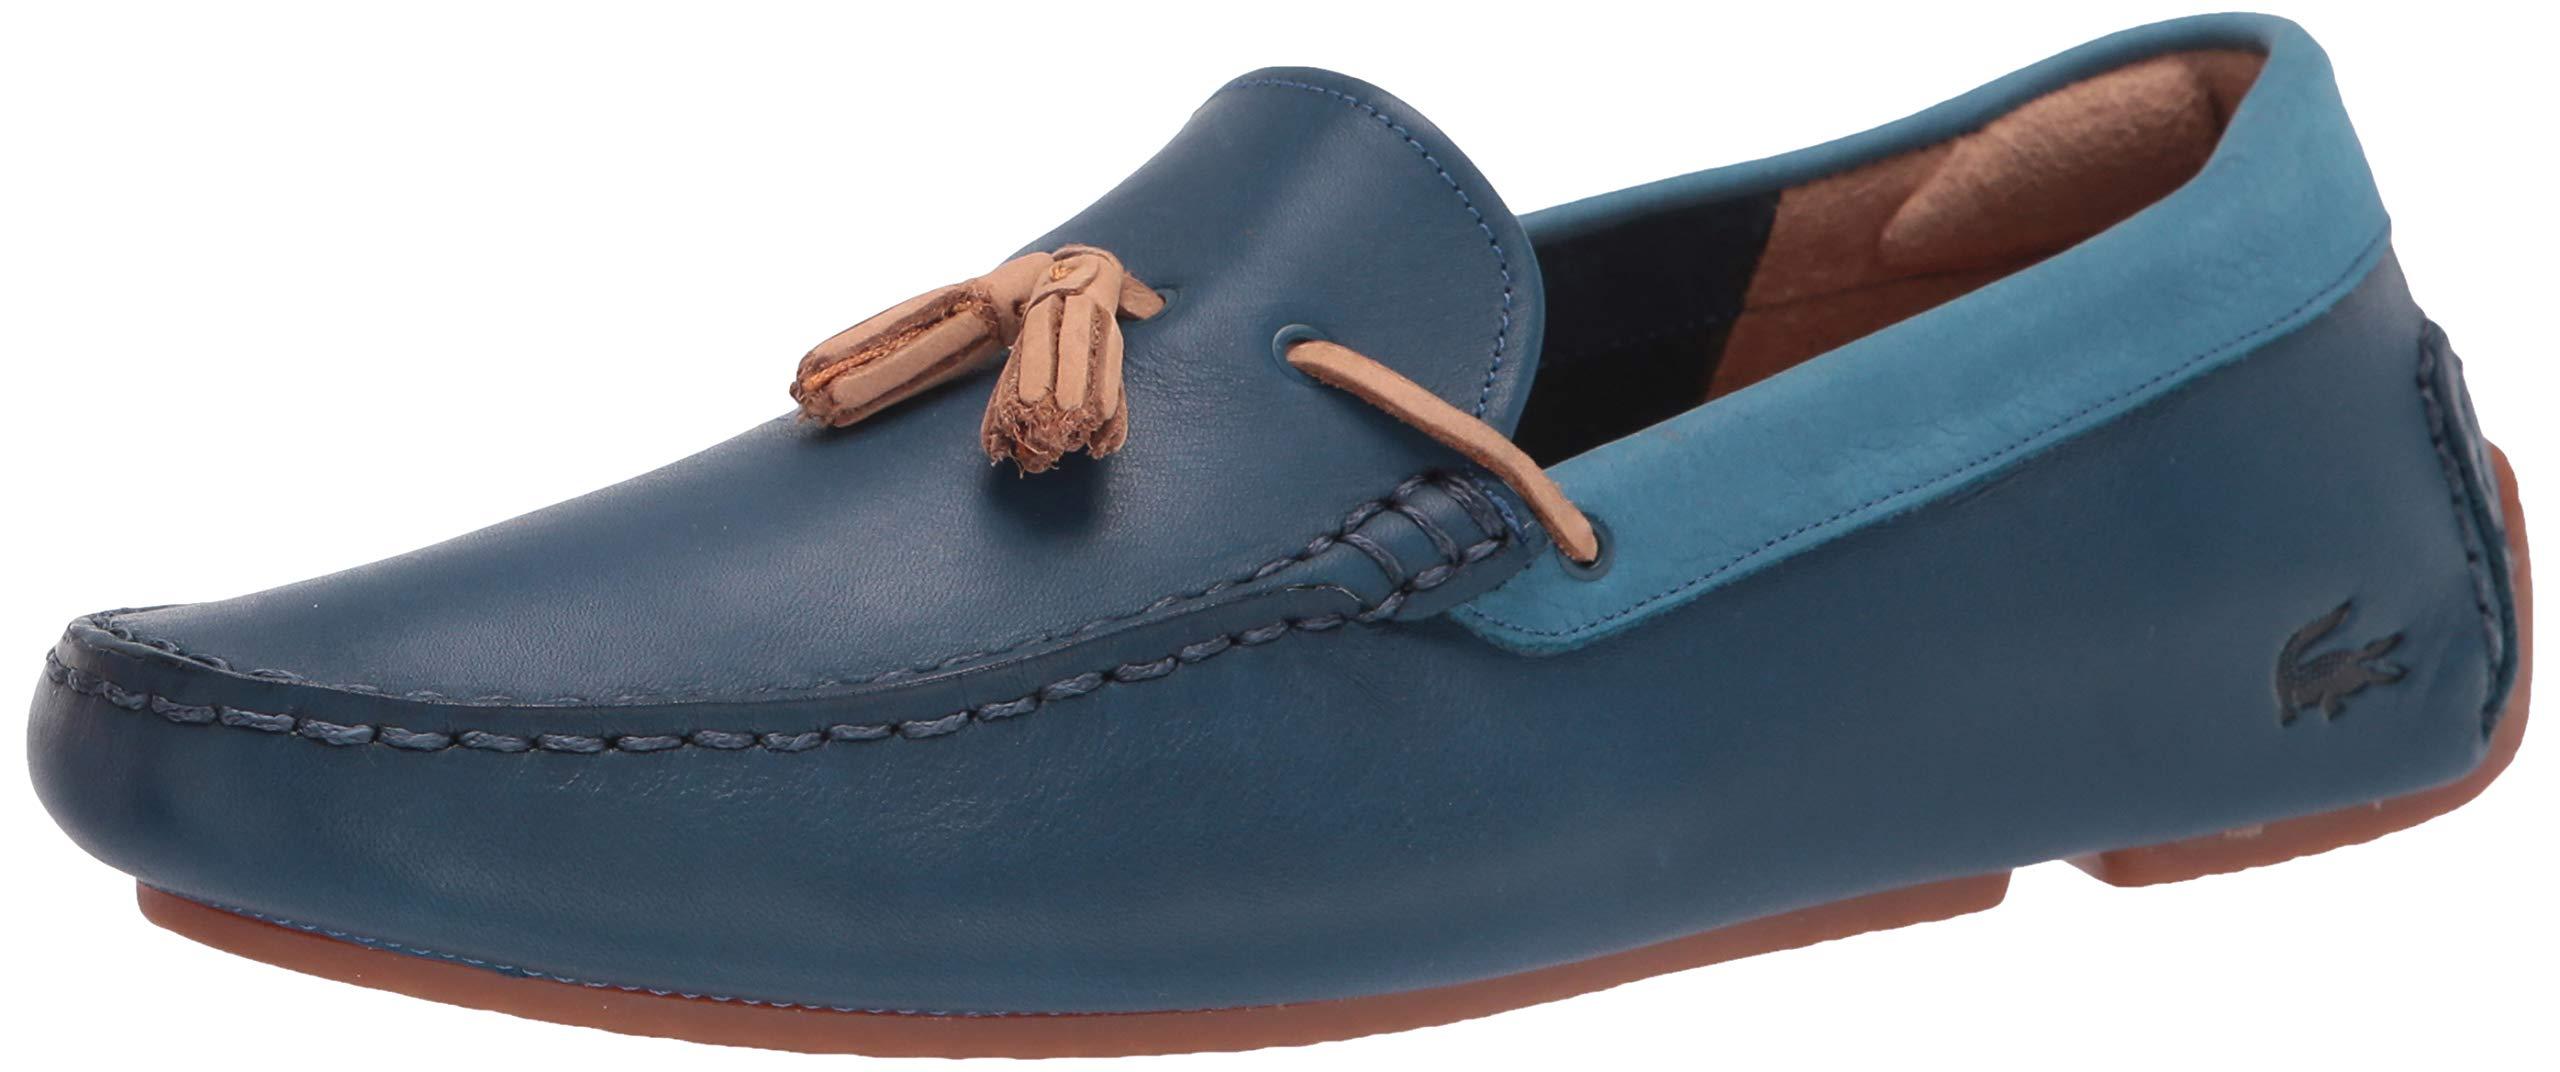 Lacoste Piloter Tassel Loafers Driving Style in Blue for Men - Save 31% -  Lyst